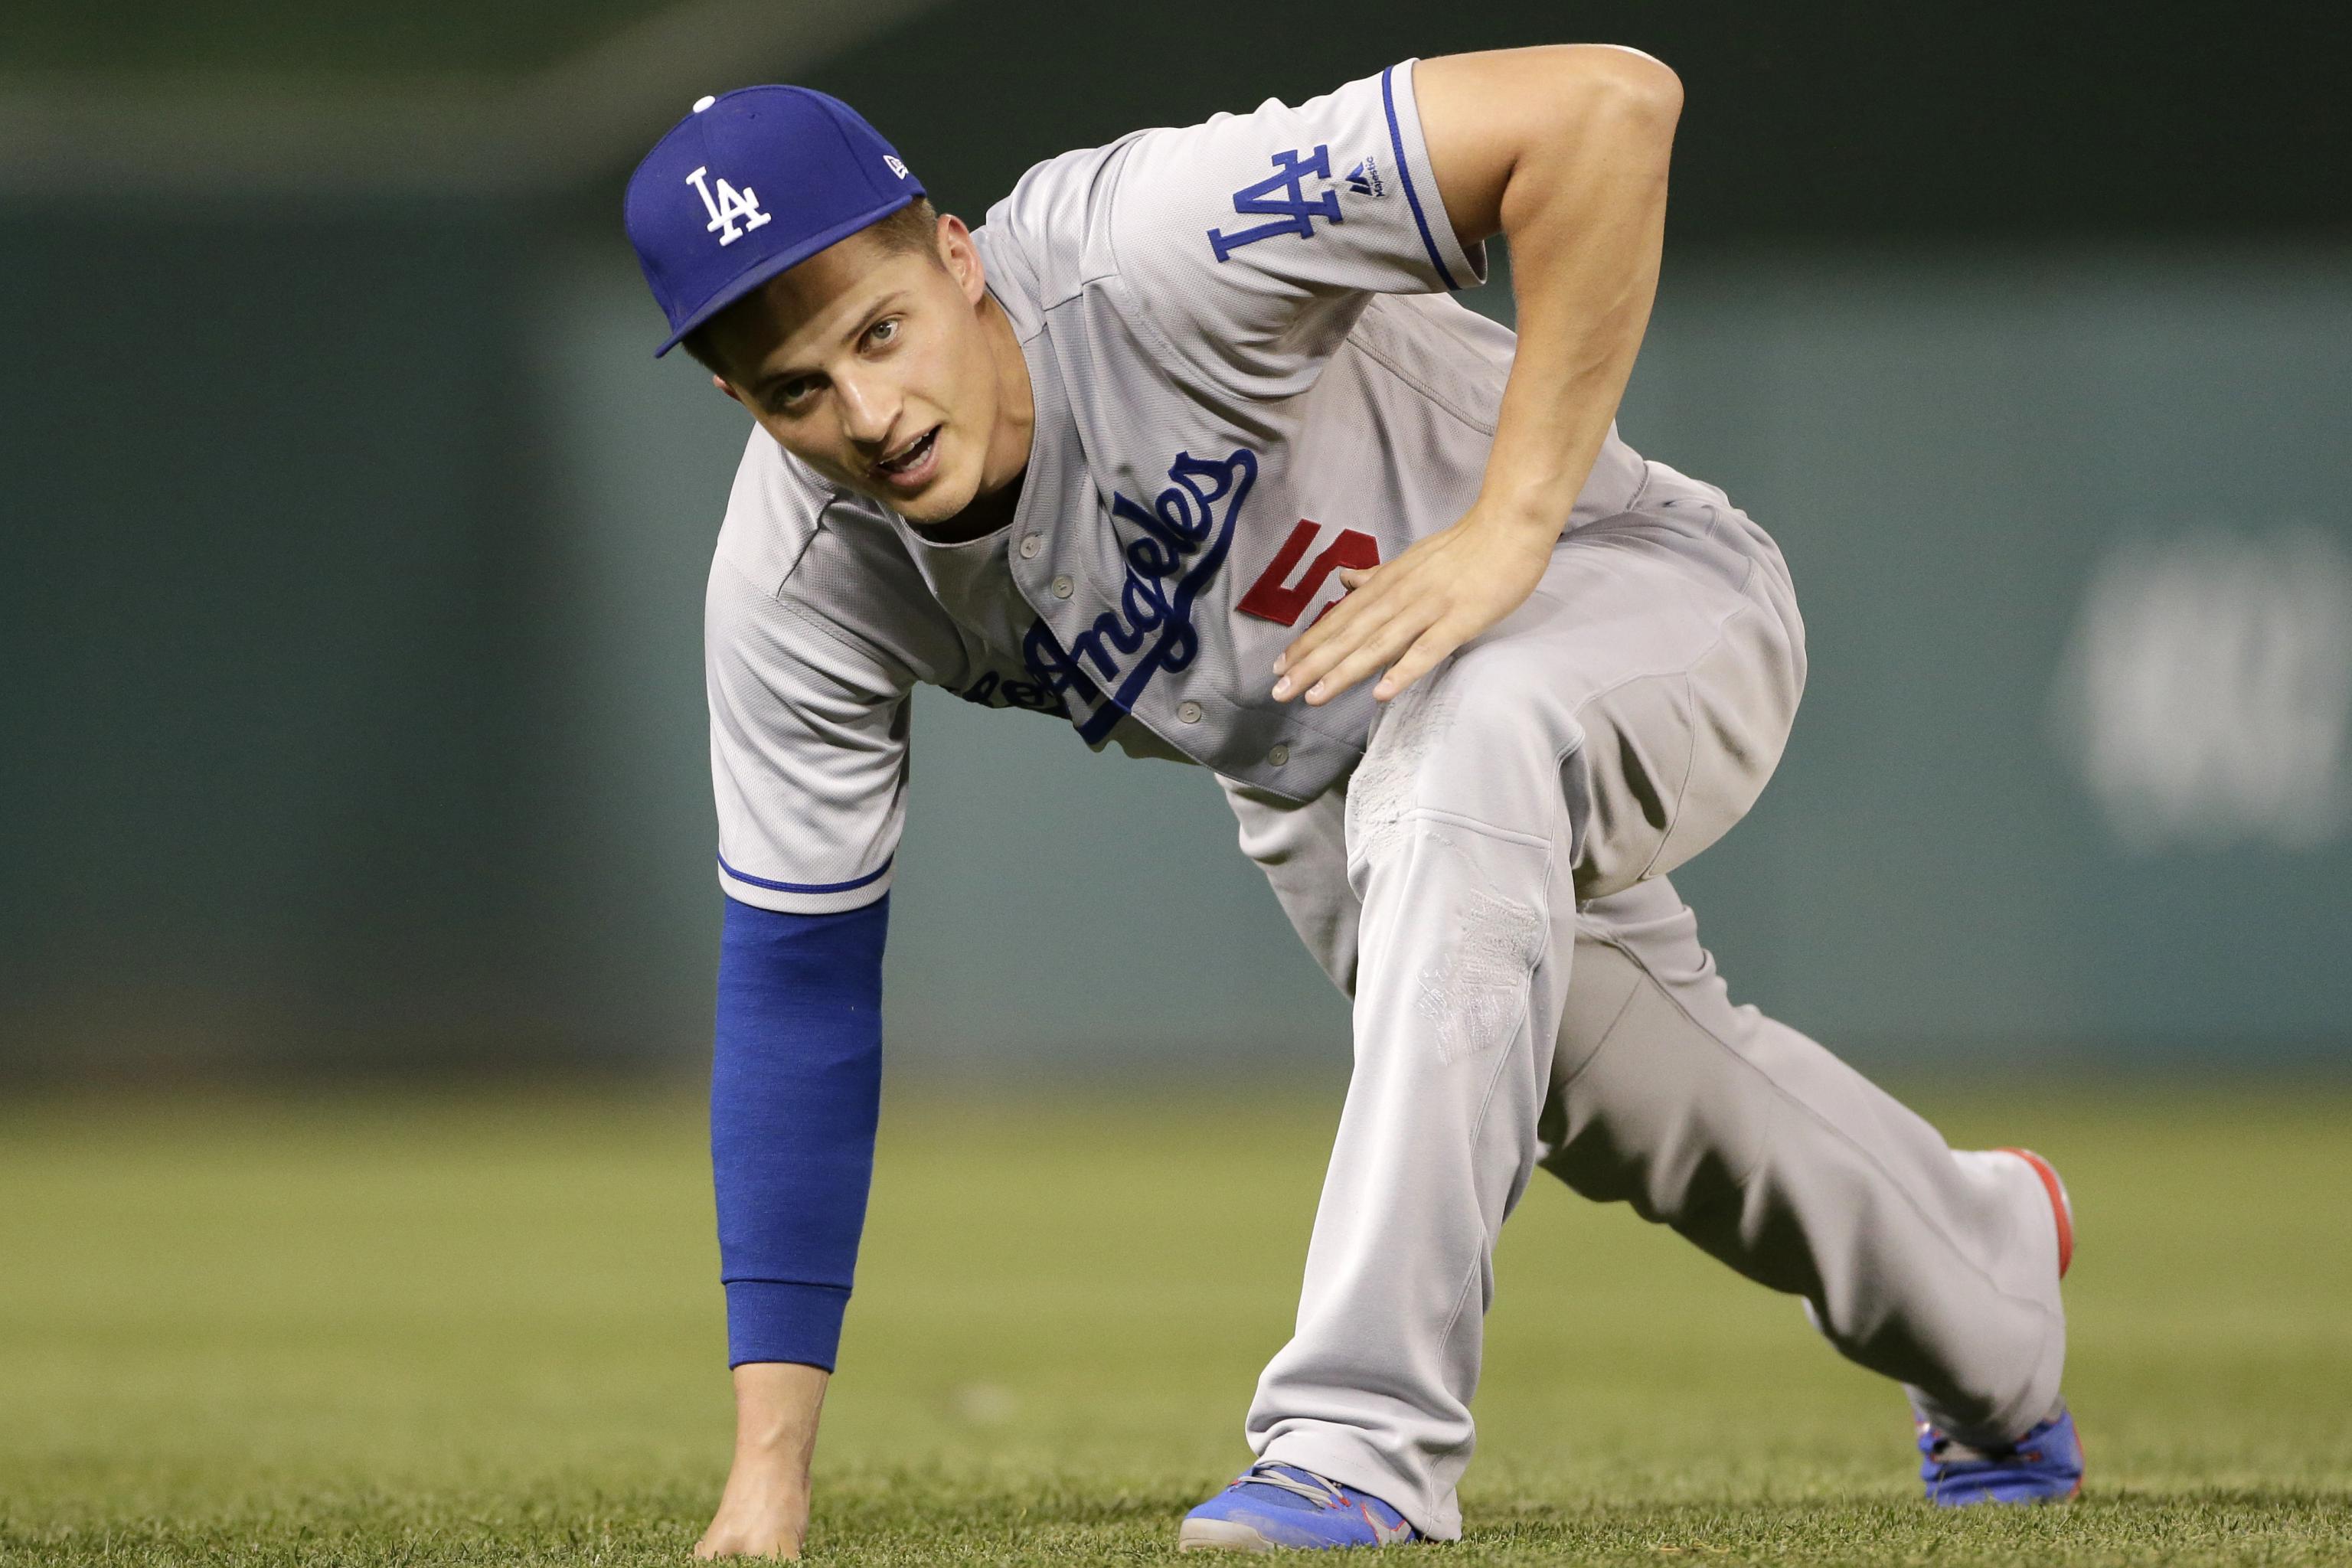 Corey Seager's hand won't require surgery, but Dodgers shortstop to be  sidelined at least three weeks - The Boston Globe